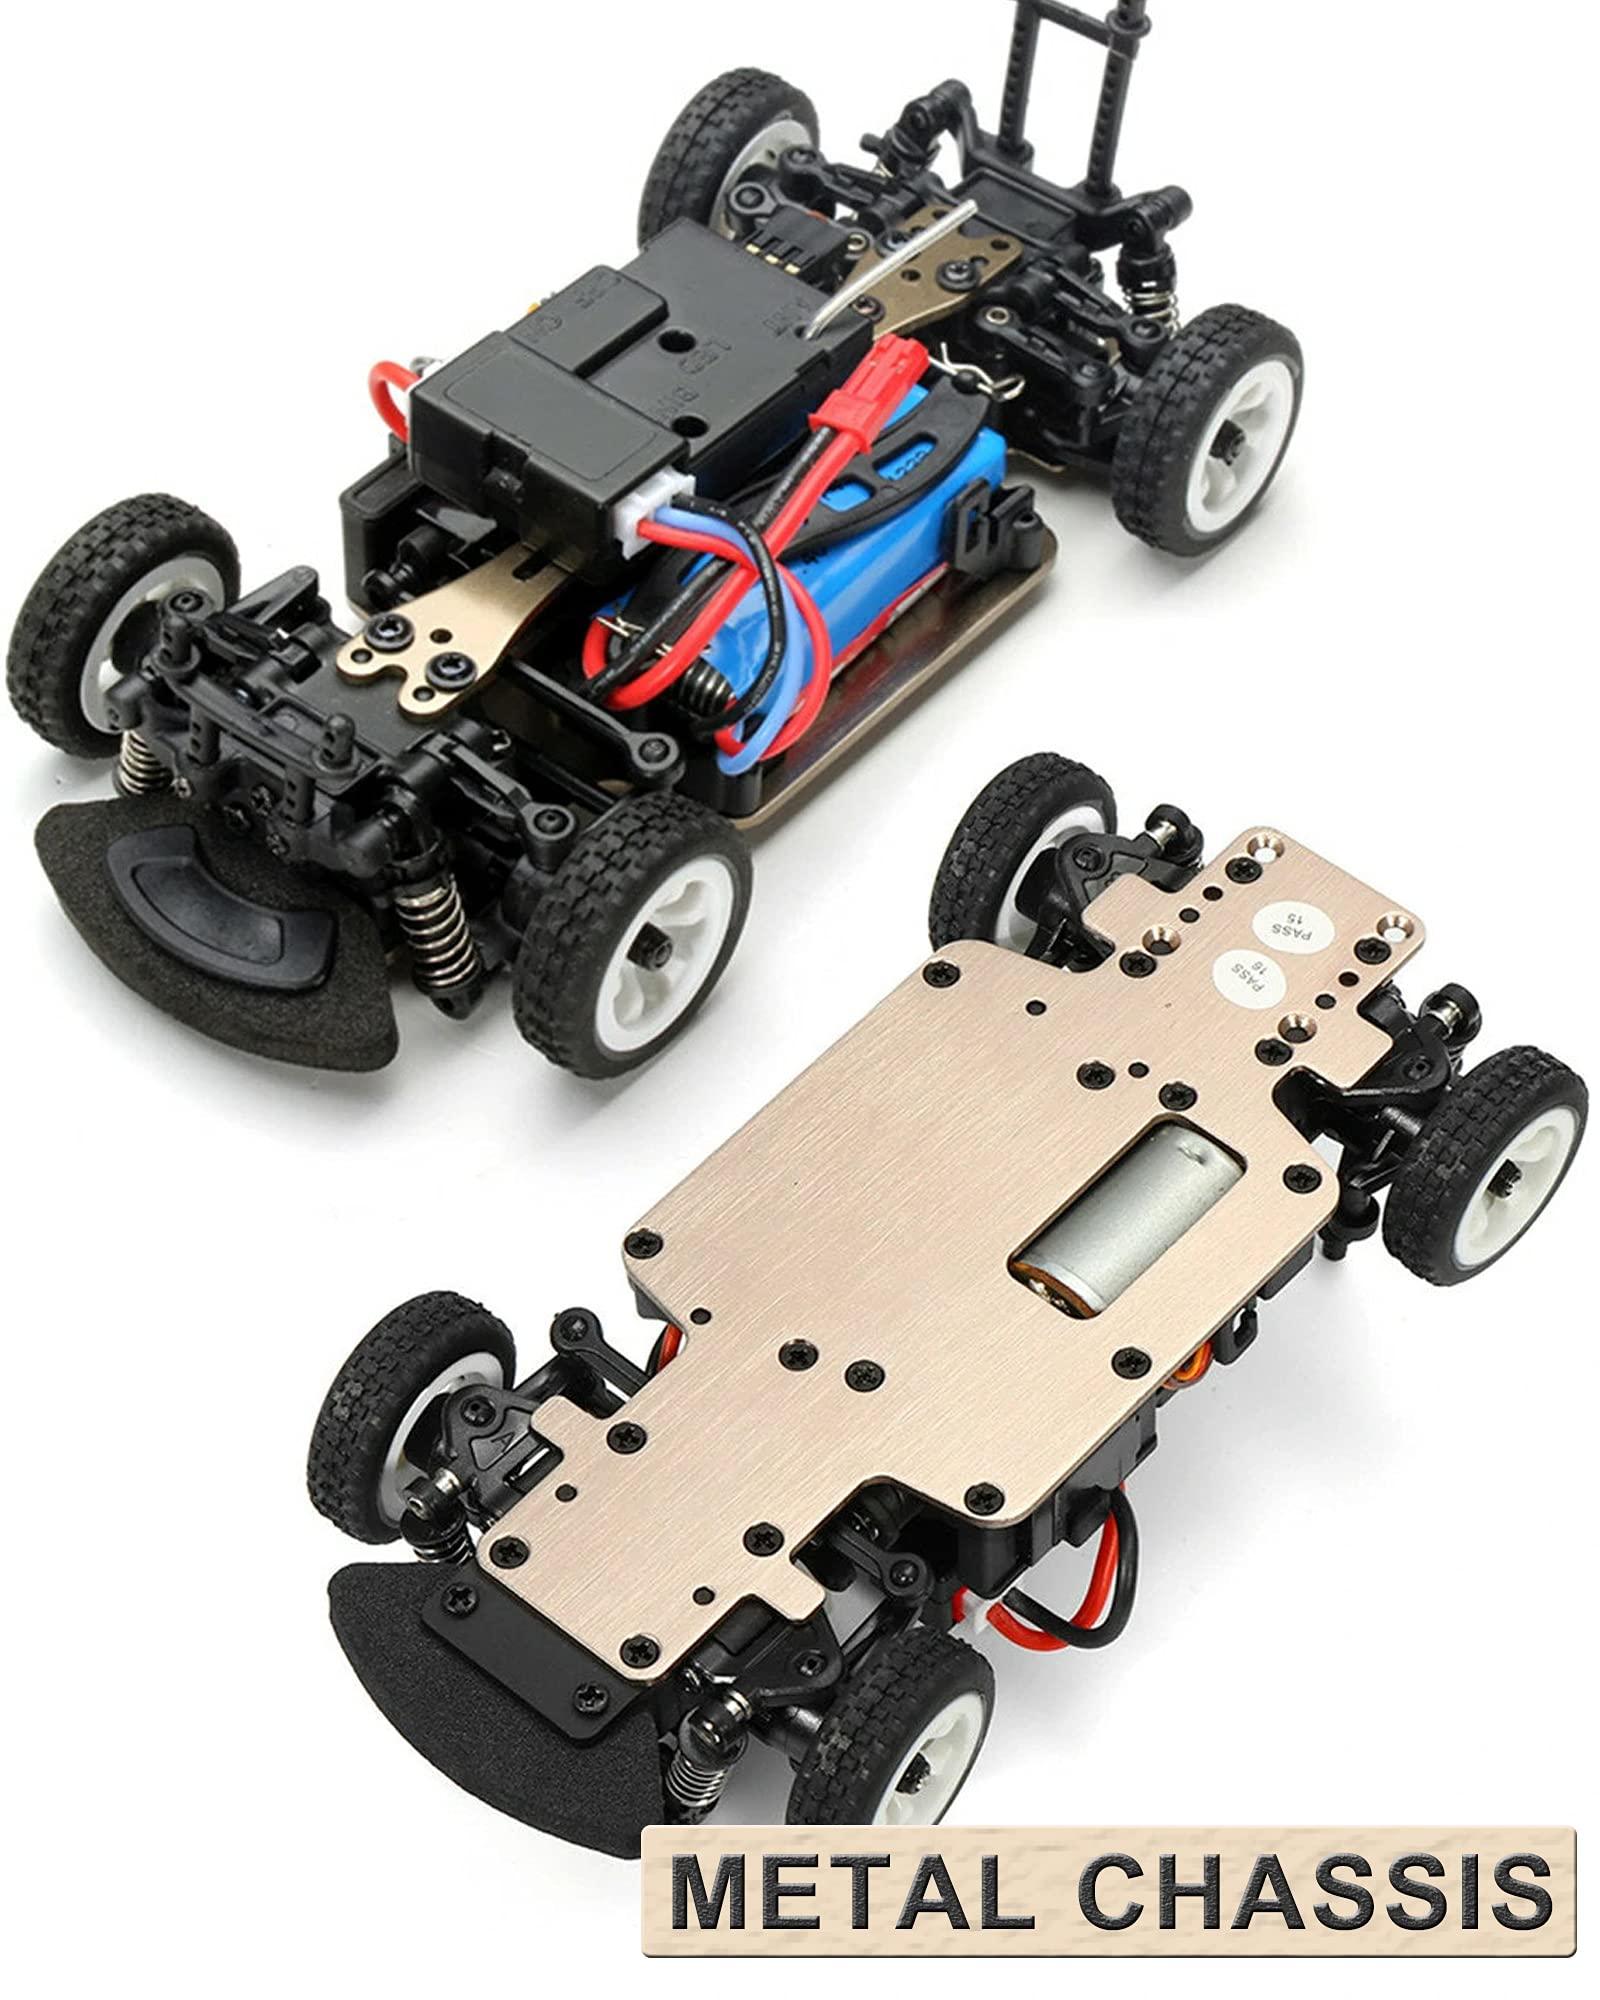 Wltoys Drift Car: Reviews from satisfied users of the WLtoys Drift Car. 